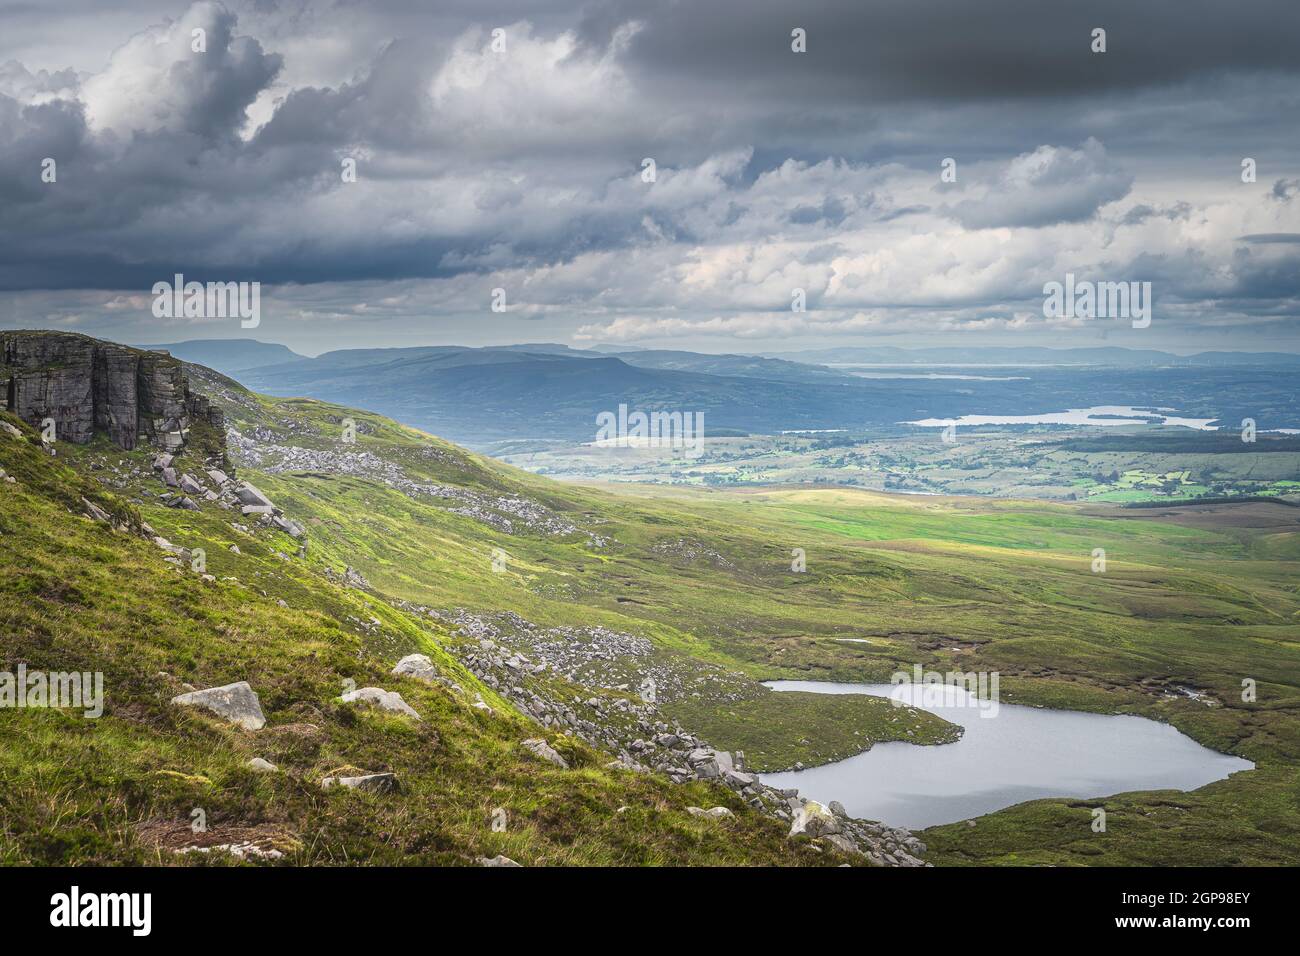 Green fields and large boulders illuminated by sunlight in Cuilcagh Mountain Park with small lakes in valley below, Northern Ireland Stock Photo